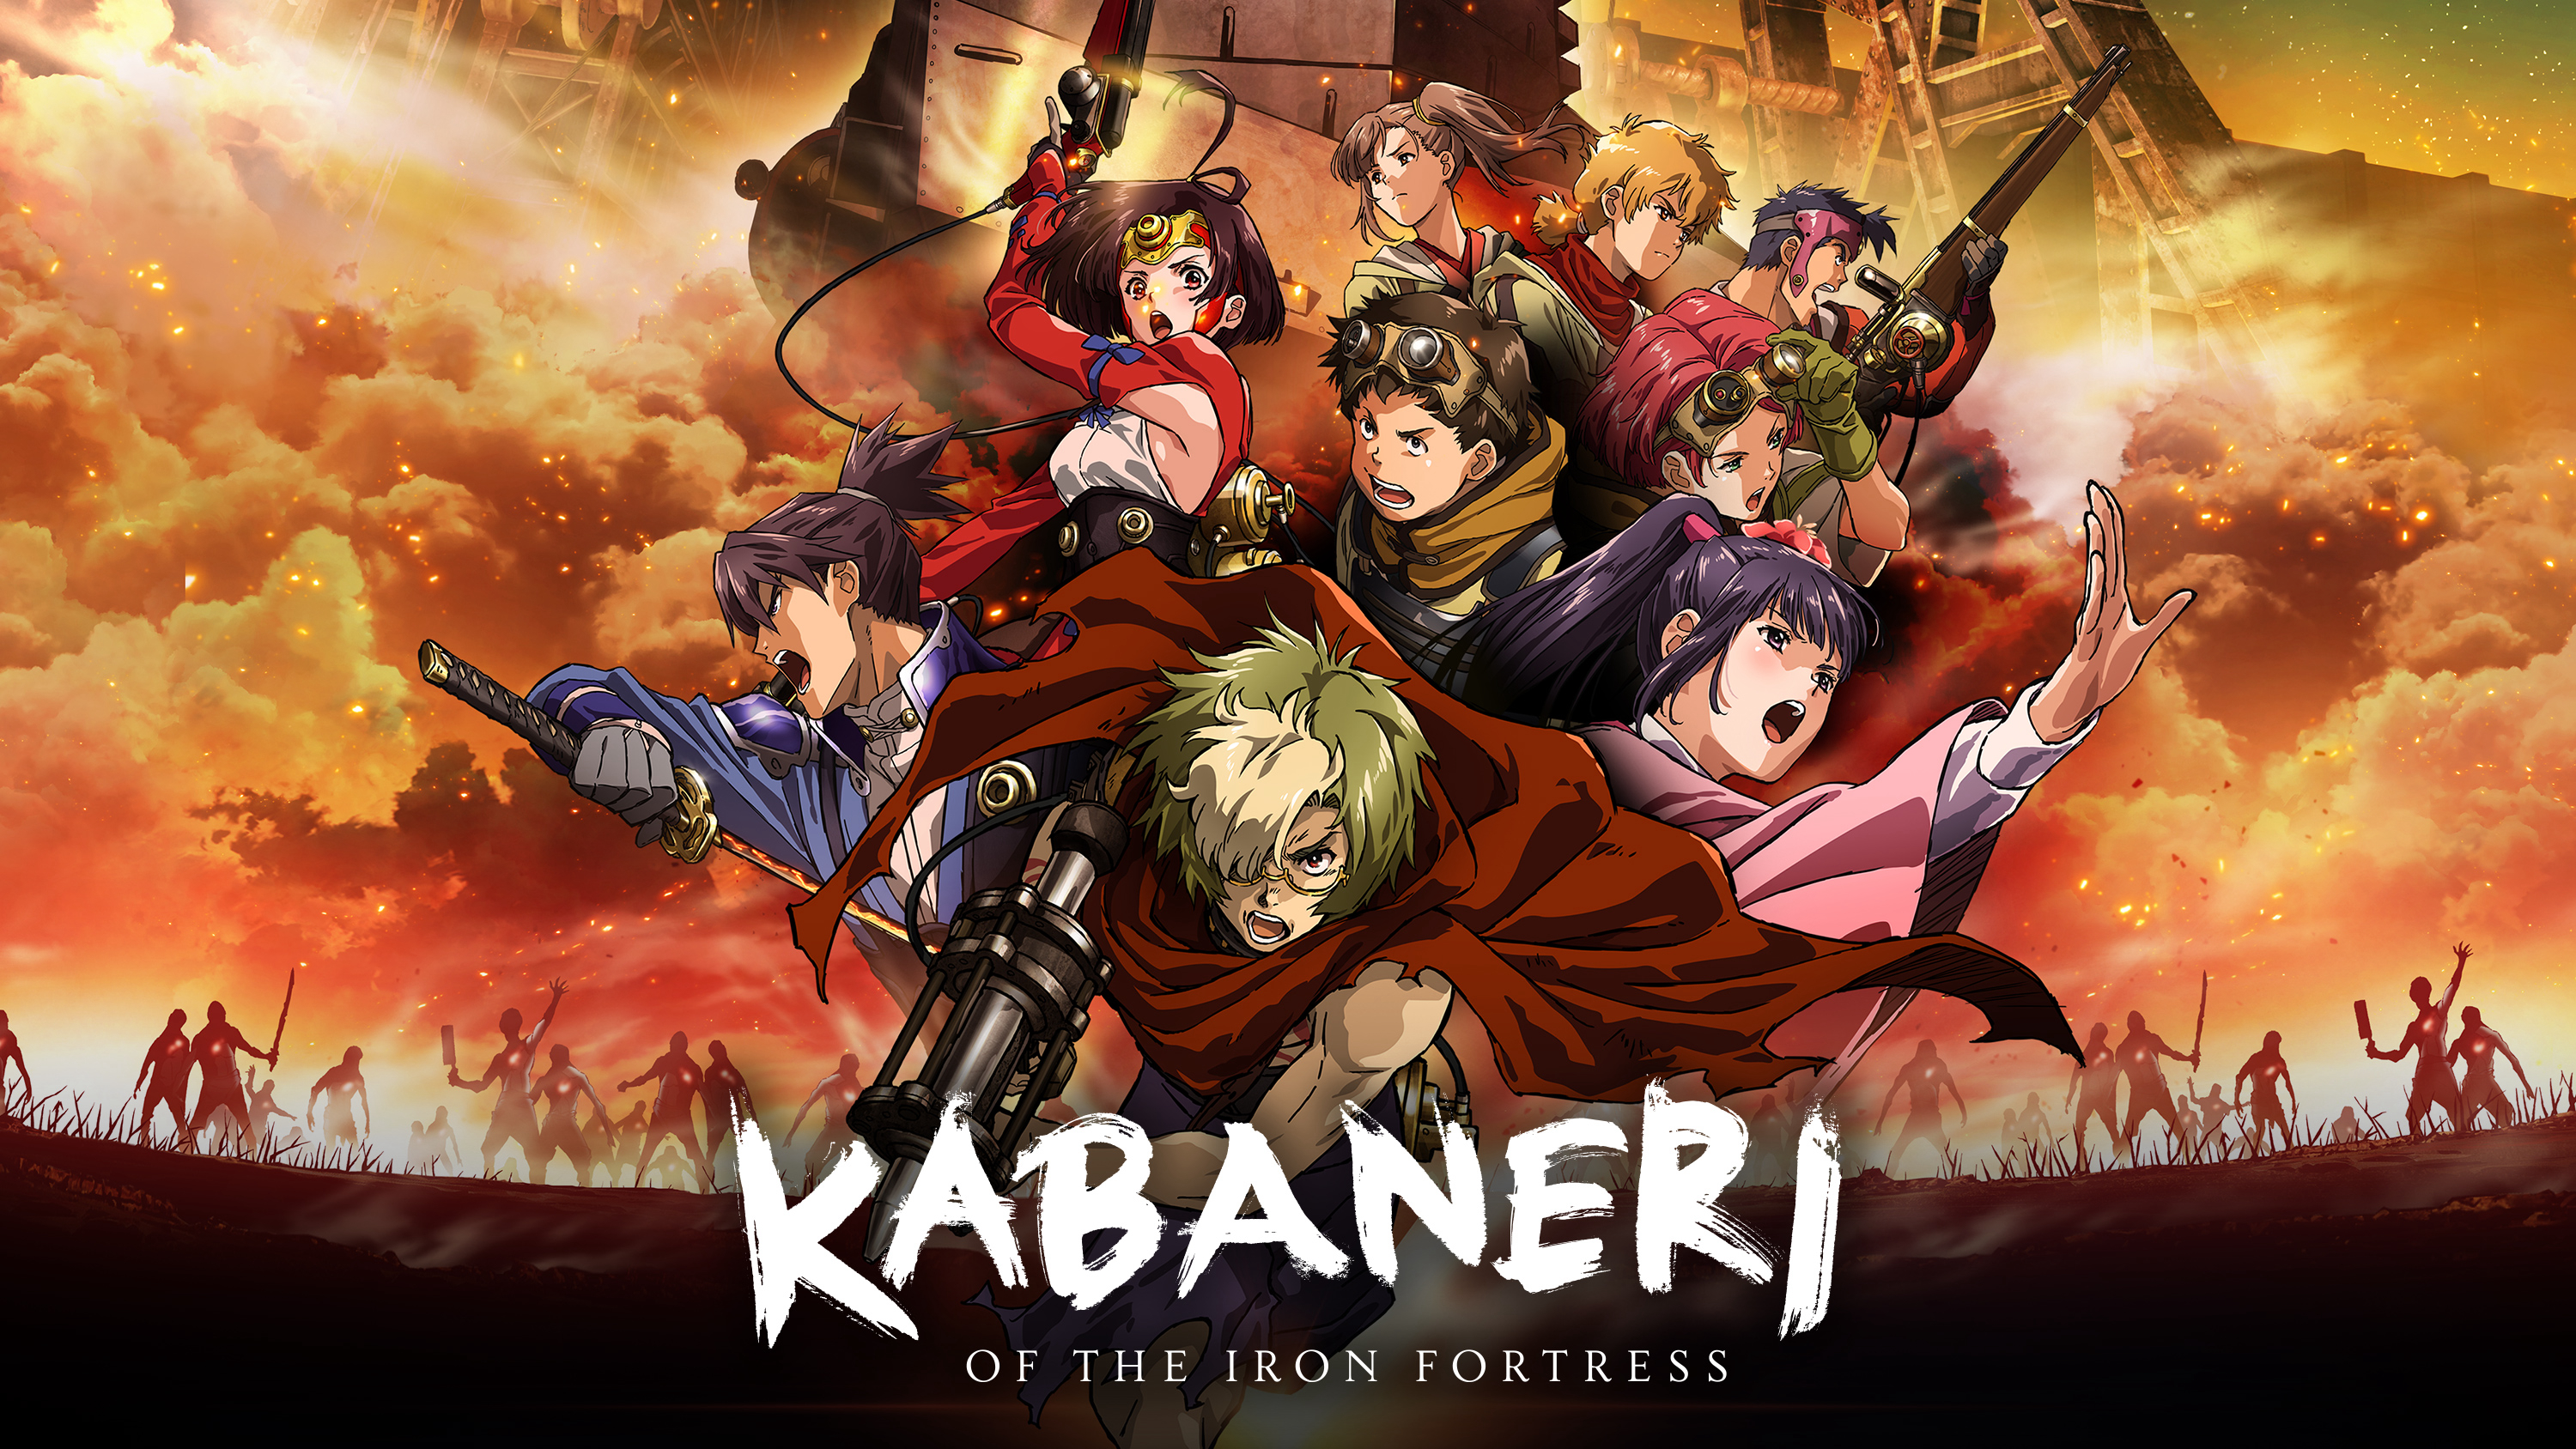 Poster Phim Thiết Giáp Chi Thành (Kabaneri of the Iron Fortress)